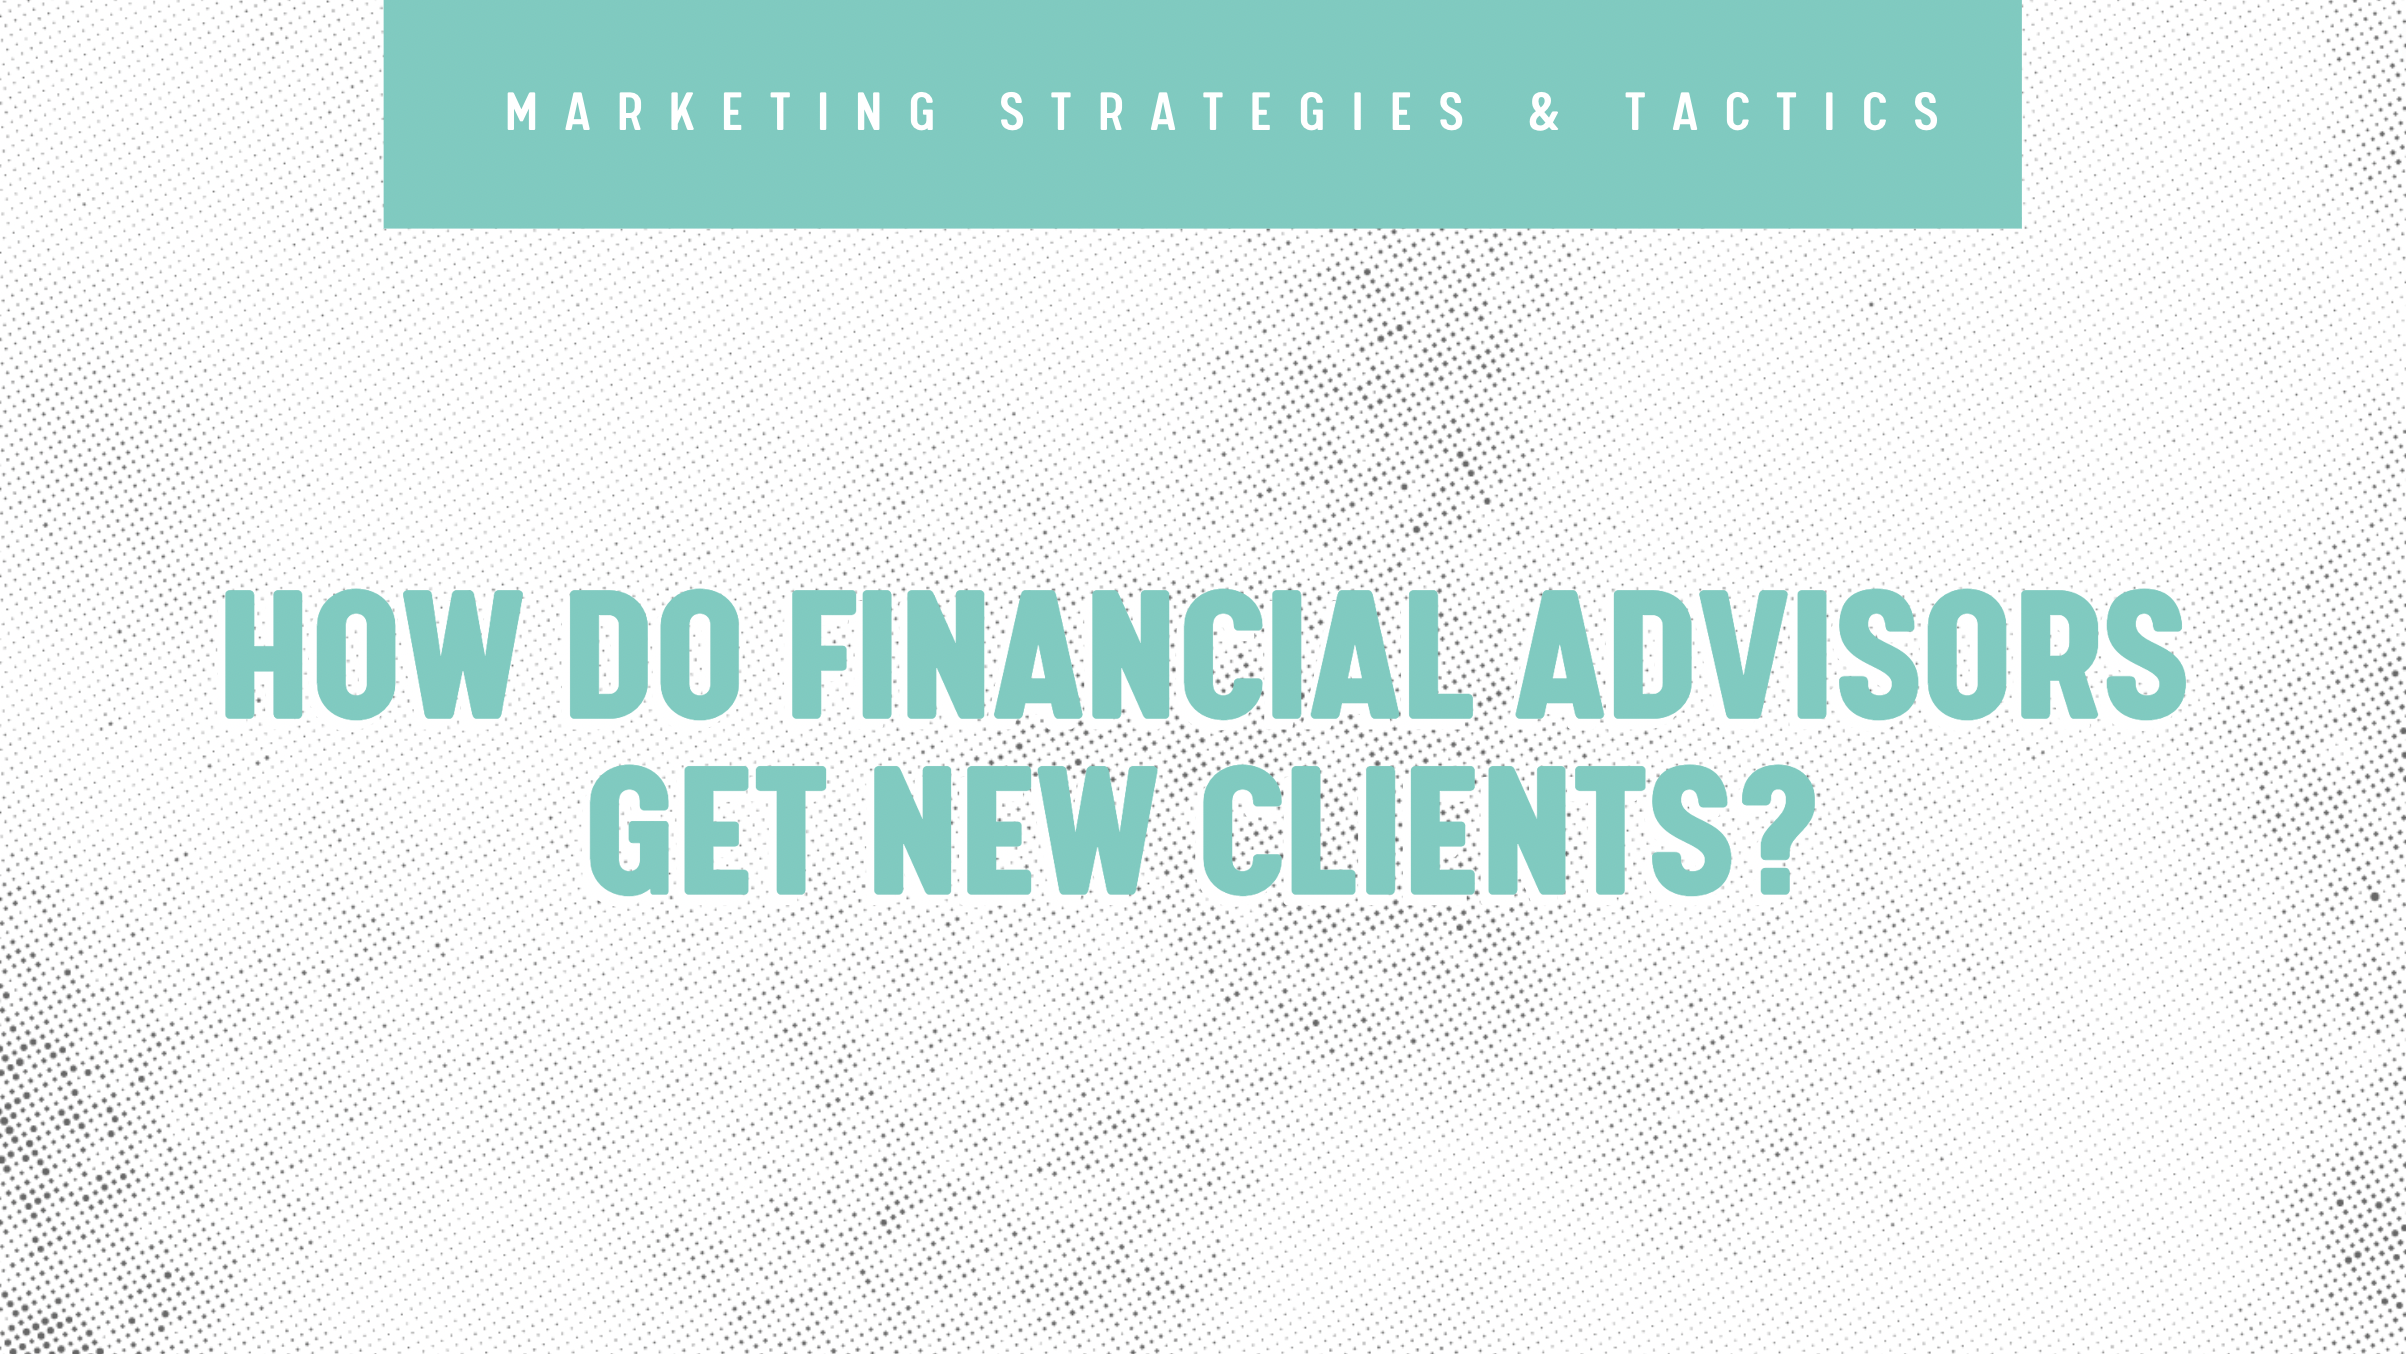 How Do Financial Advisors Get New Clients?